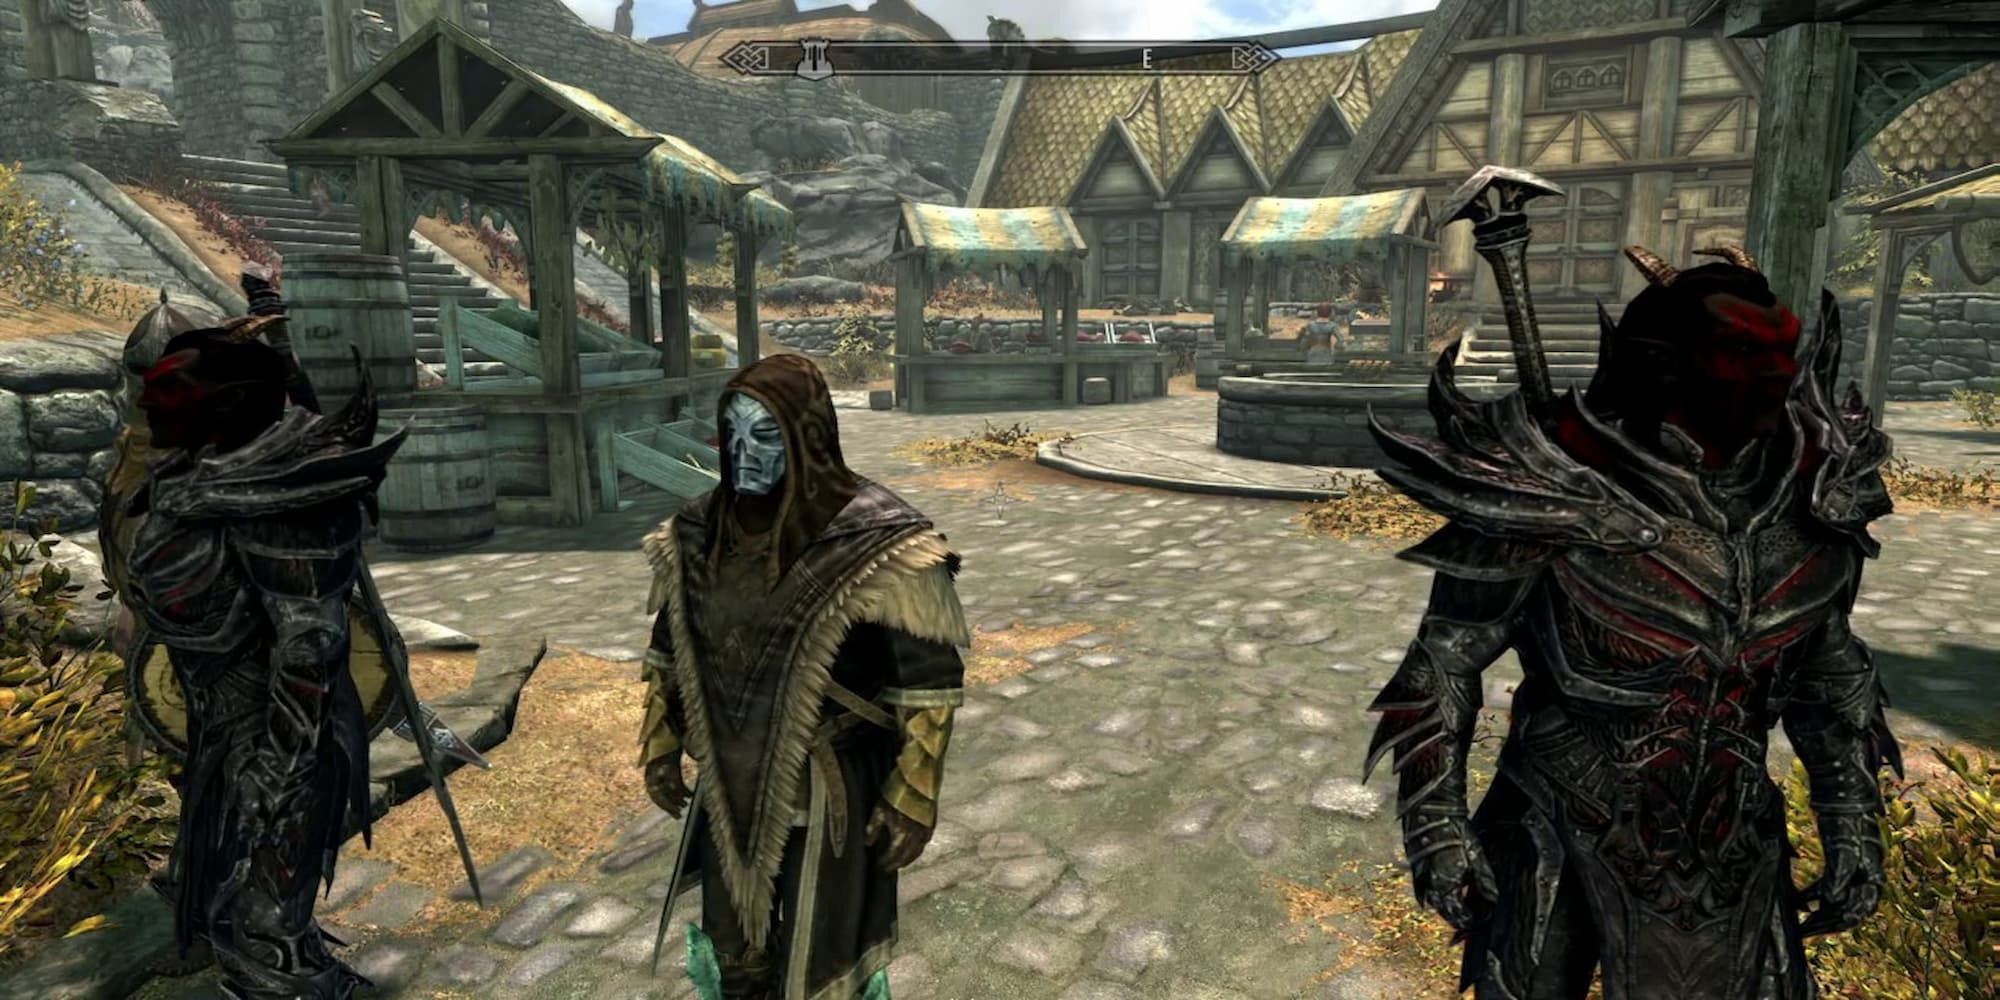 Skyrim player surrounded by two Daedra